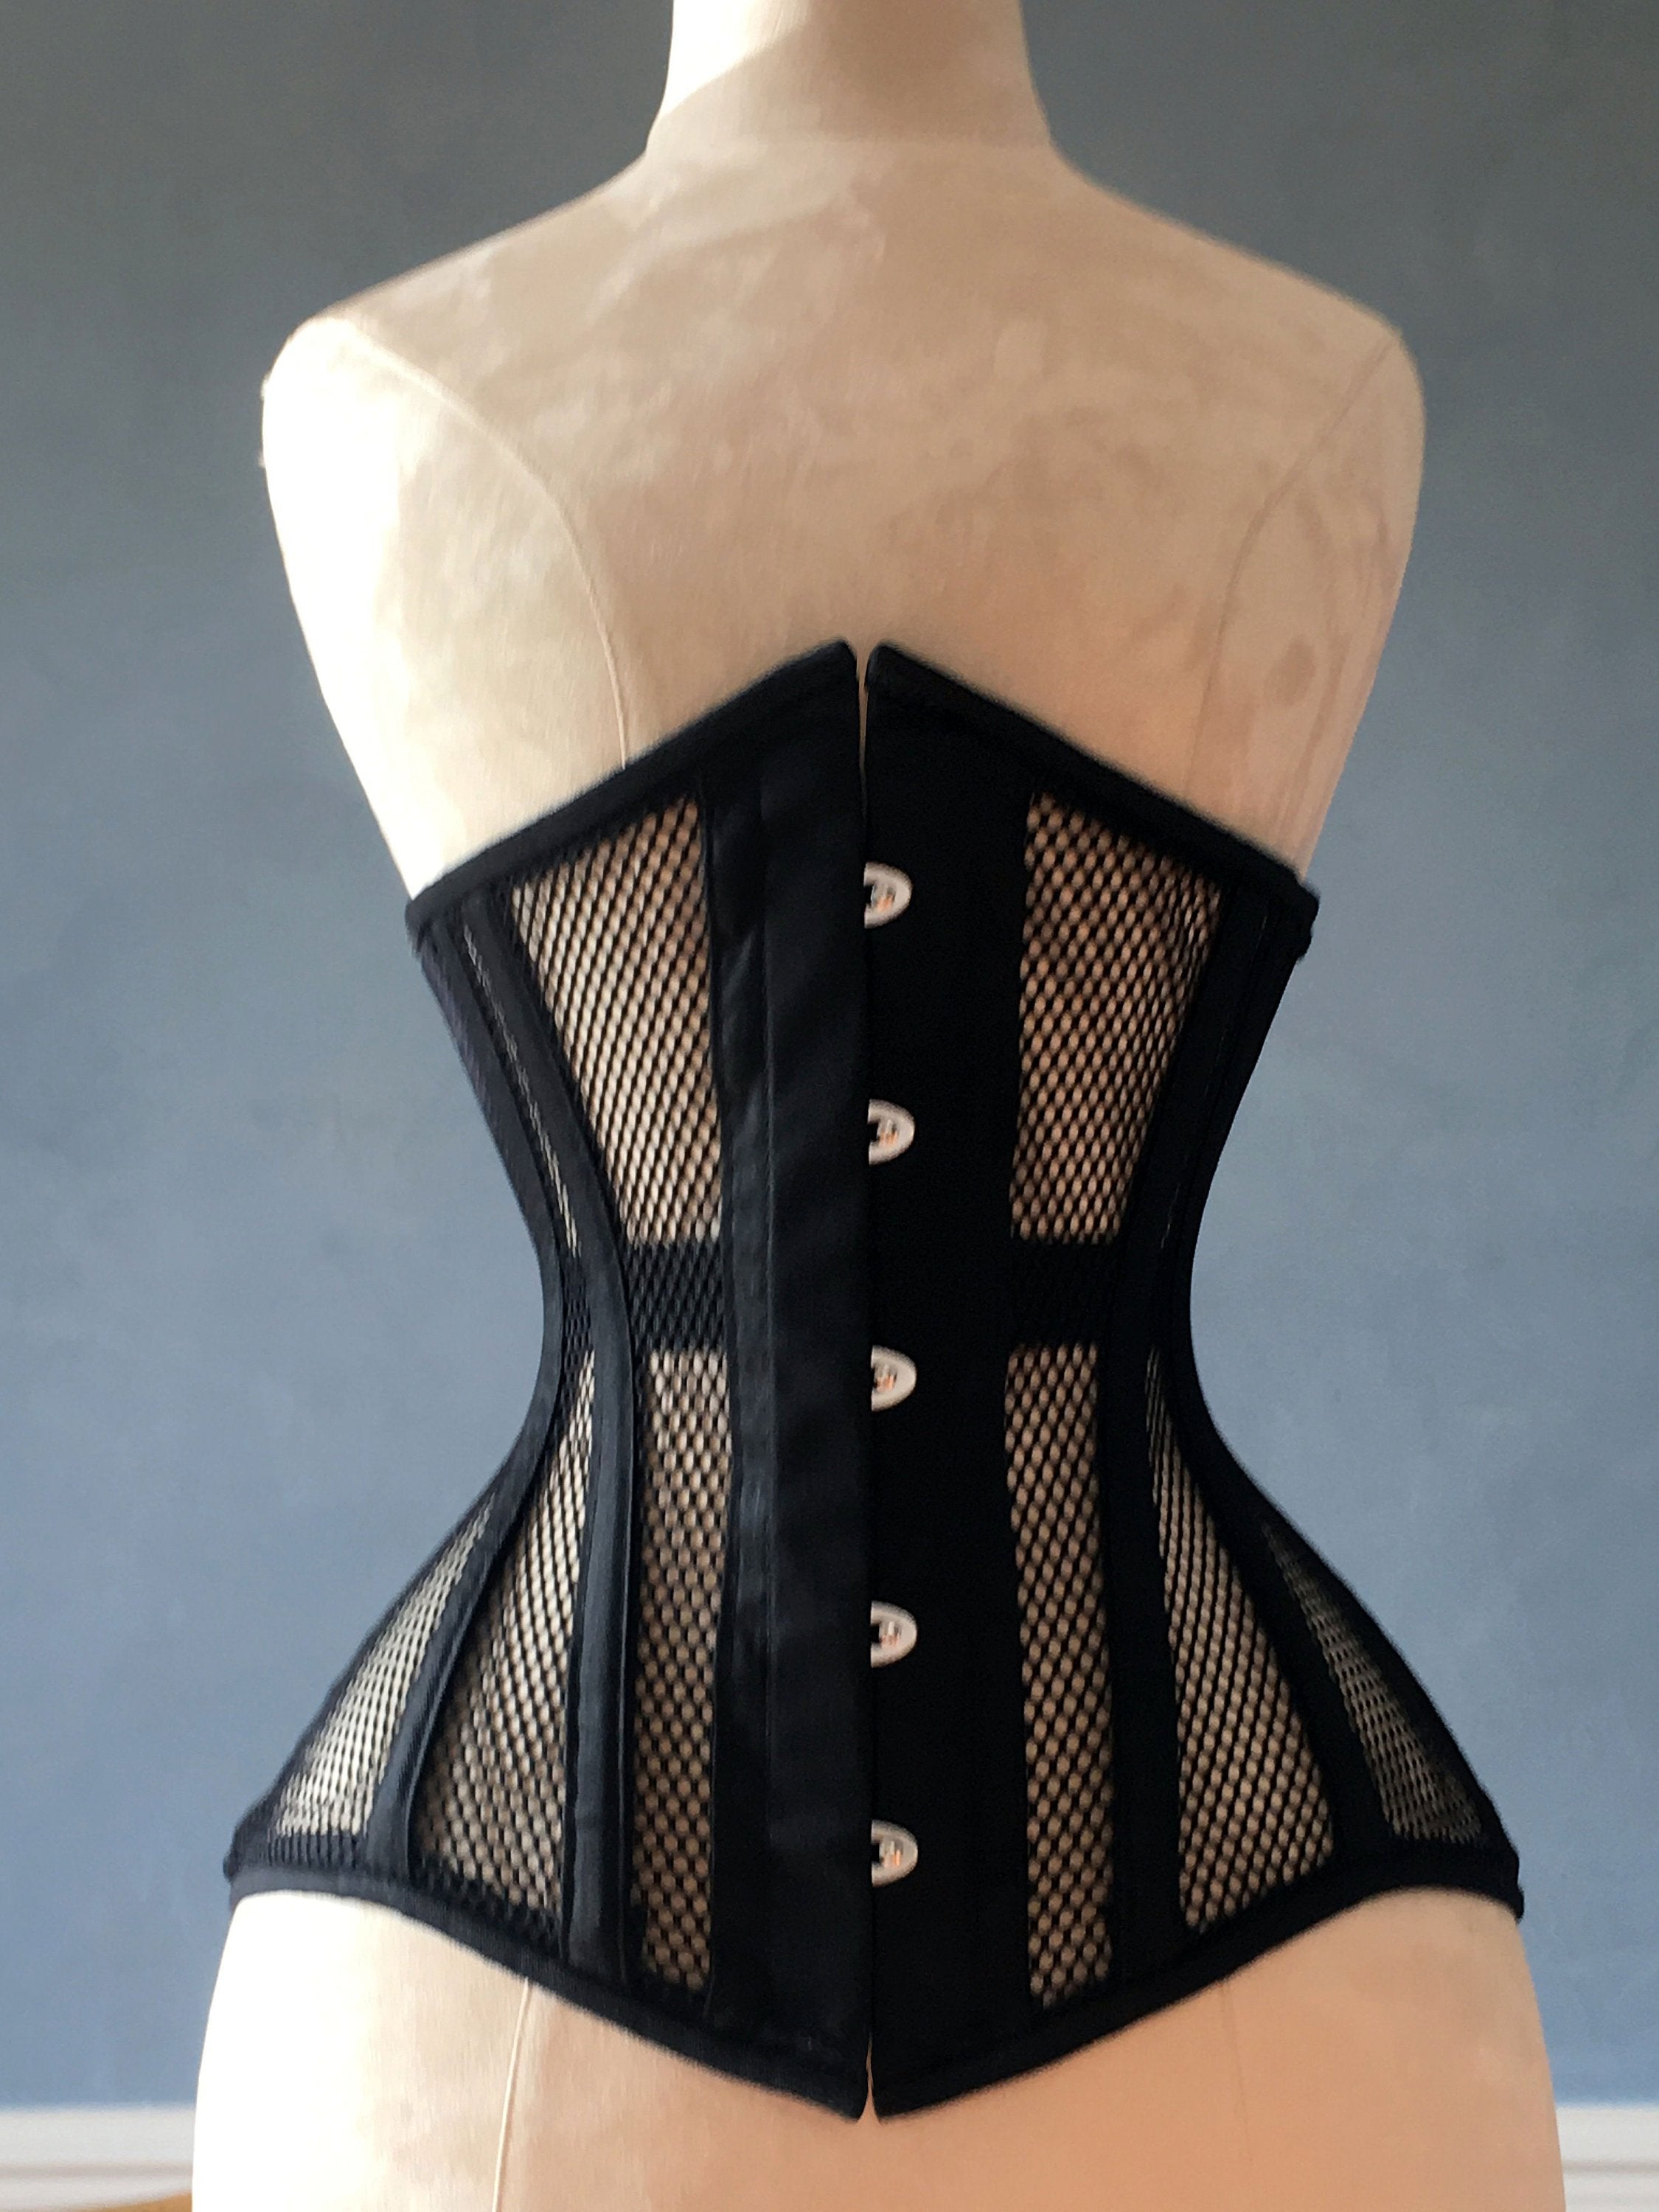 Women's Black/Apricot Spiral Corset Top Waist Corset Steel Boned Bustier  Corset Top Gothic Corsets and Bustiers Corselet with G-string Underbust  Corset 